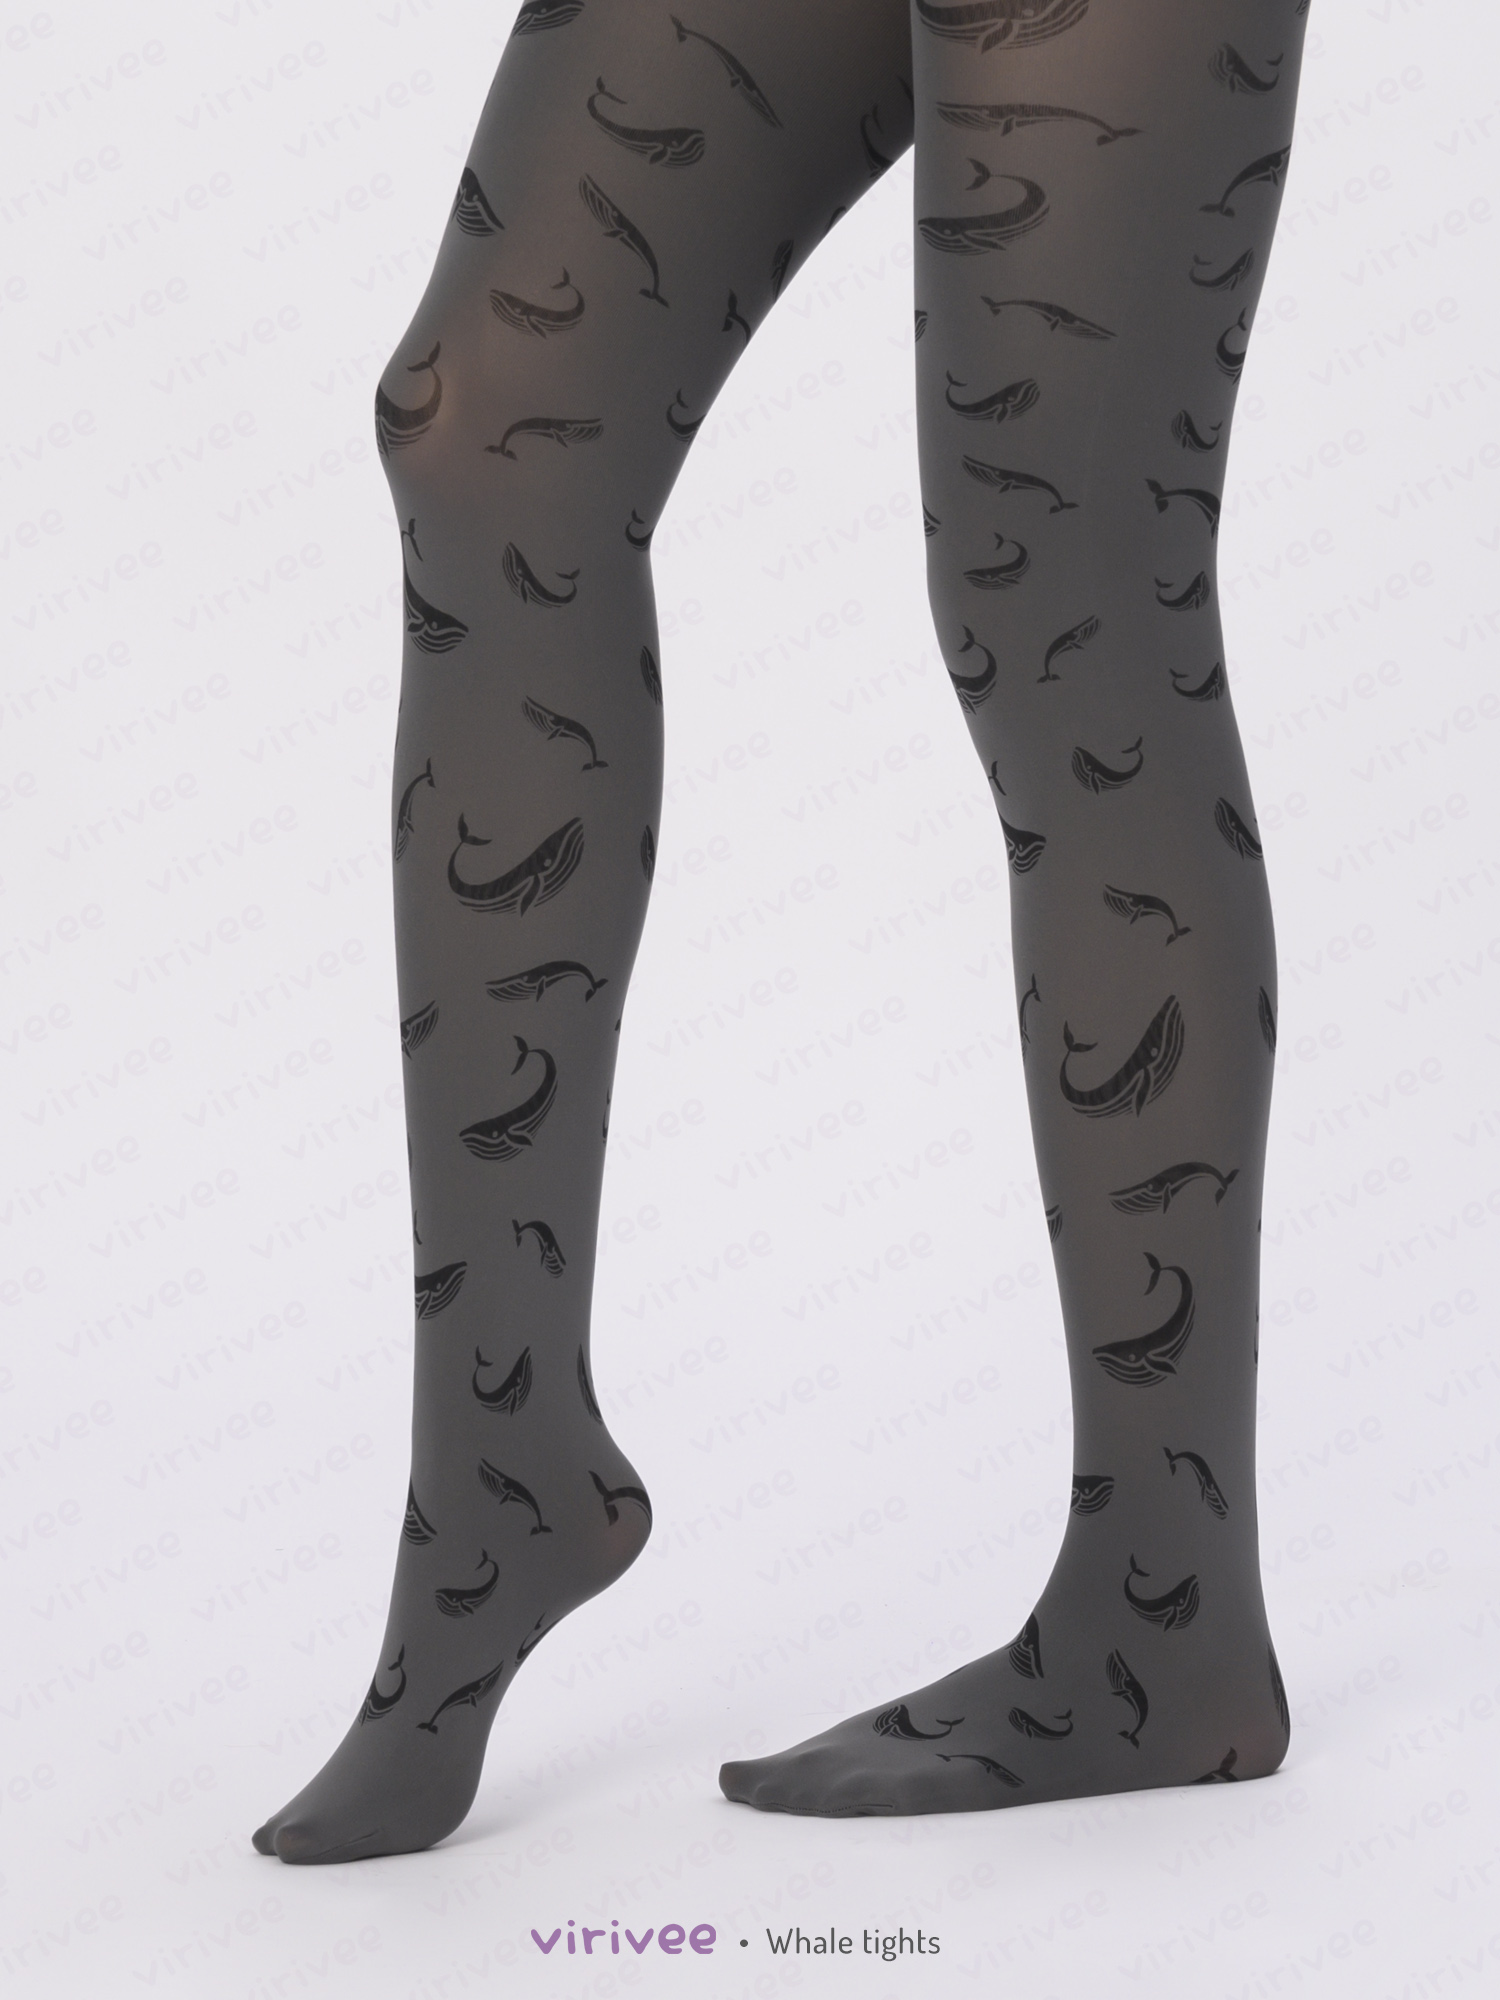 Whale tights by Virivee